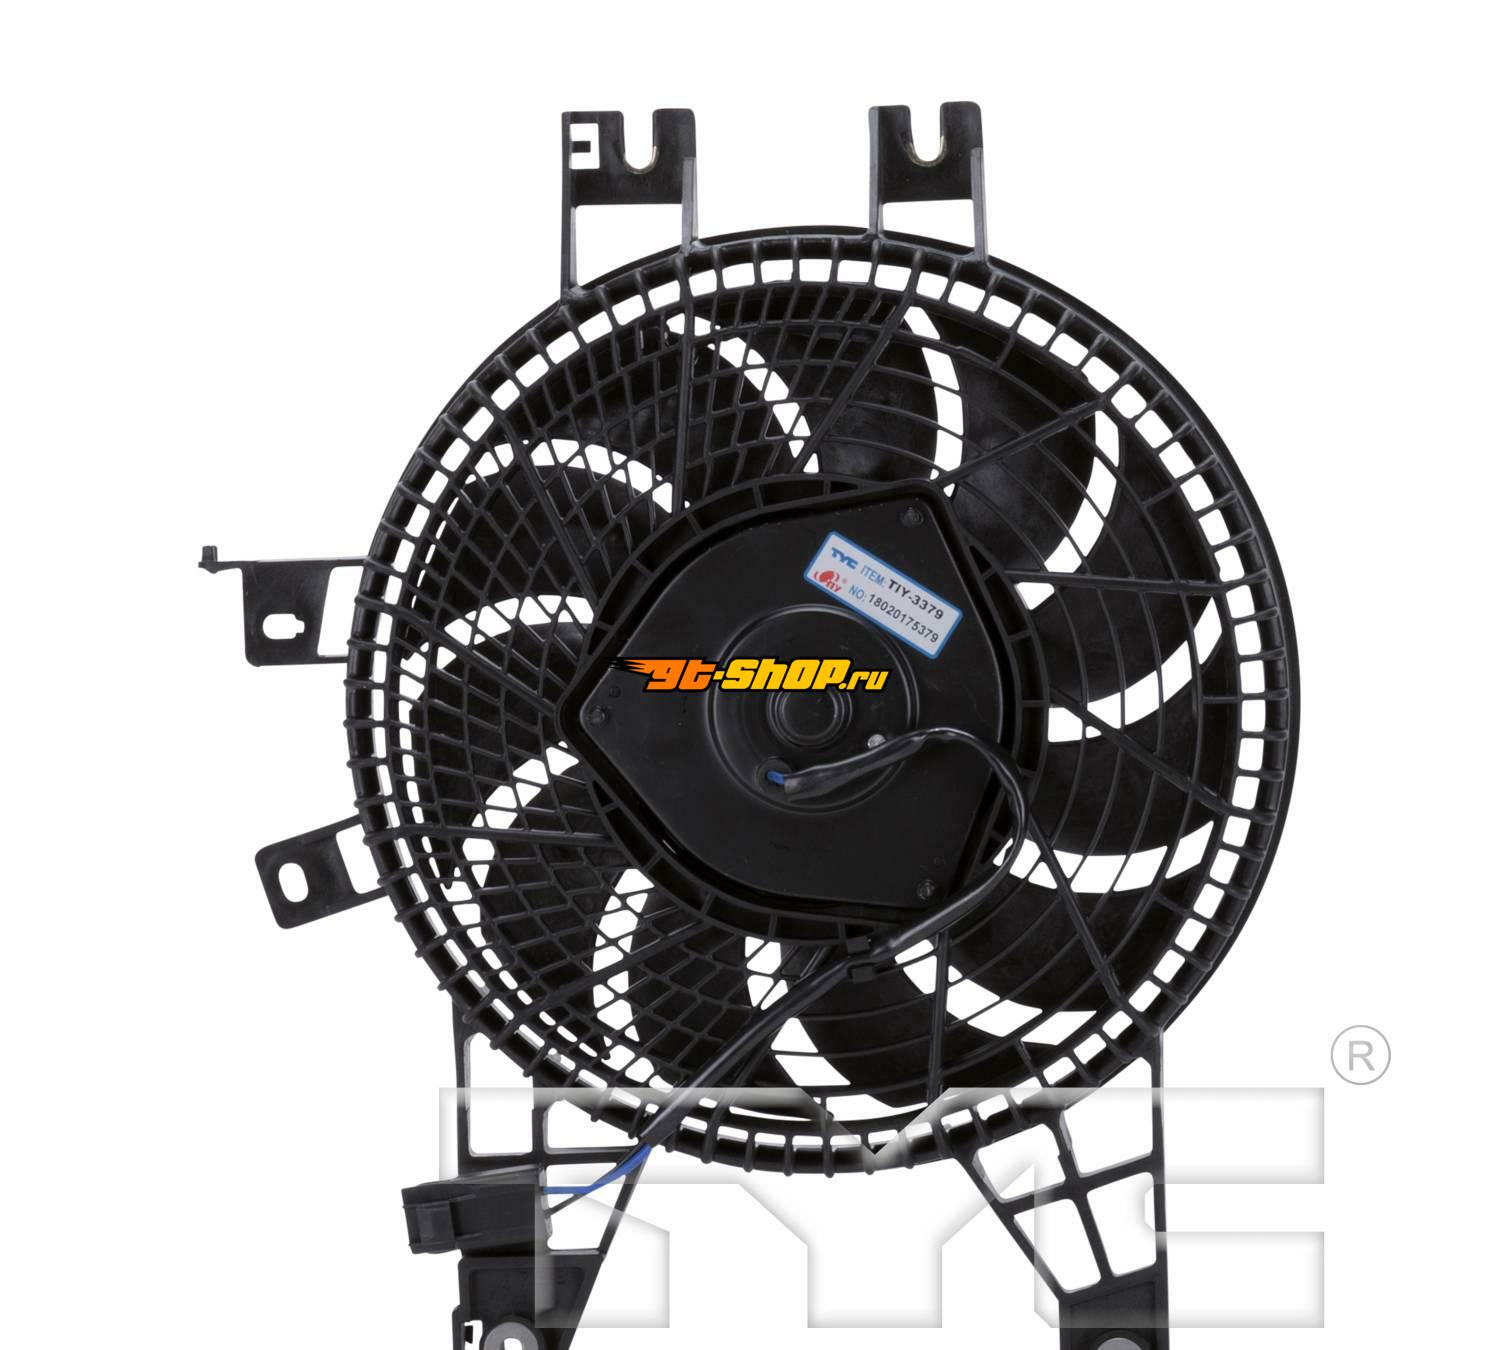 Ac condenser fan only starts fifty percent